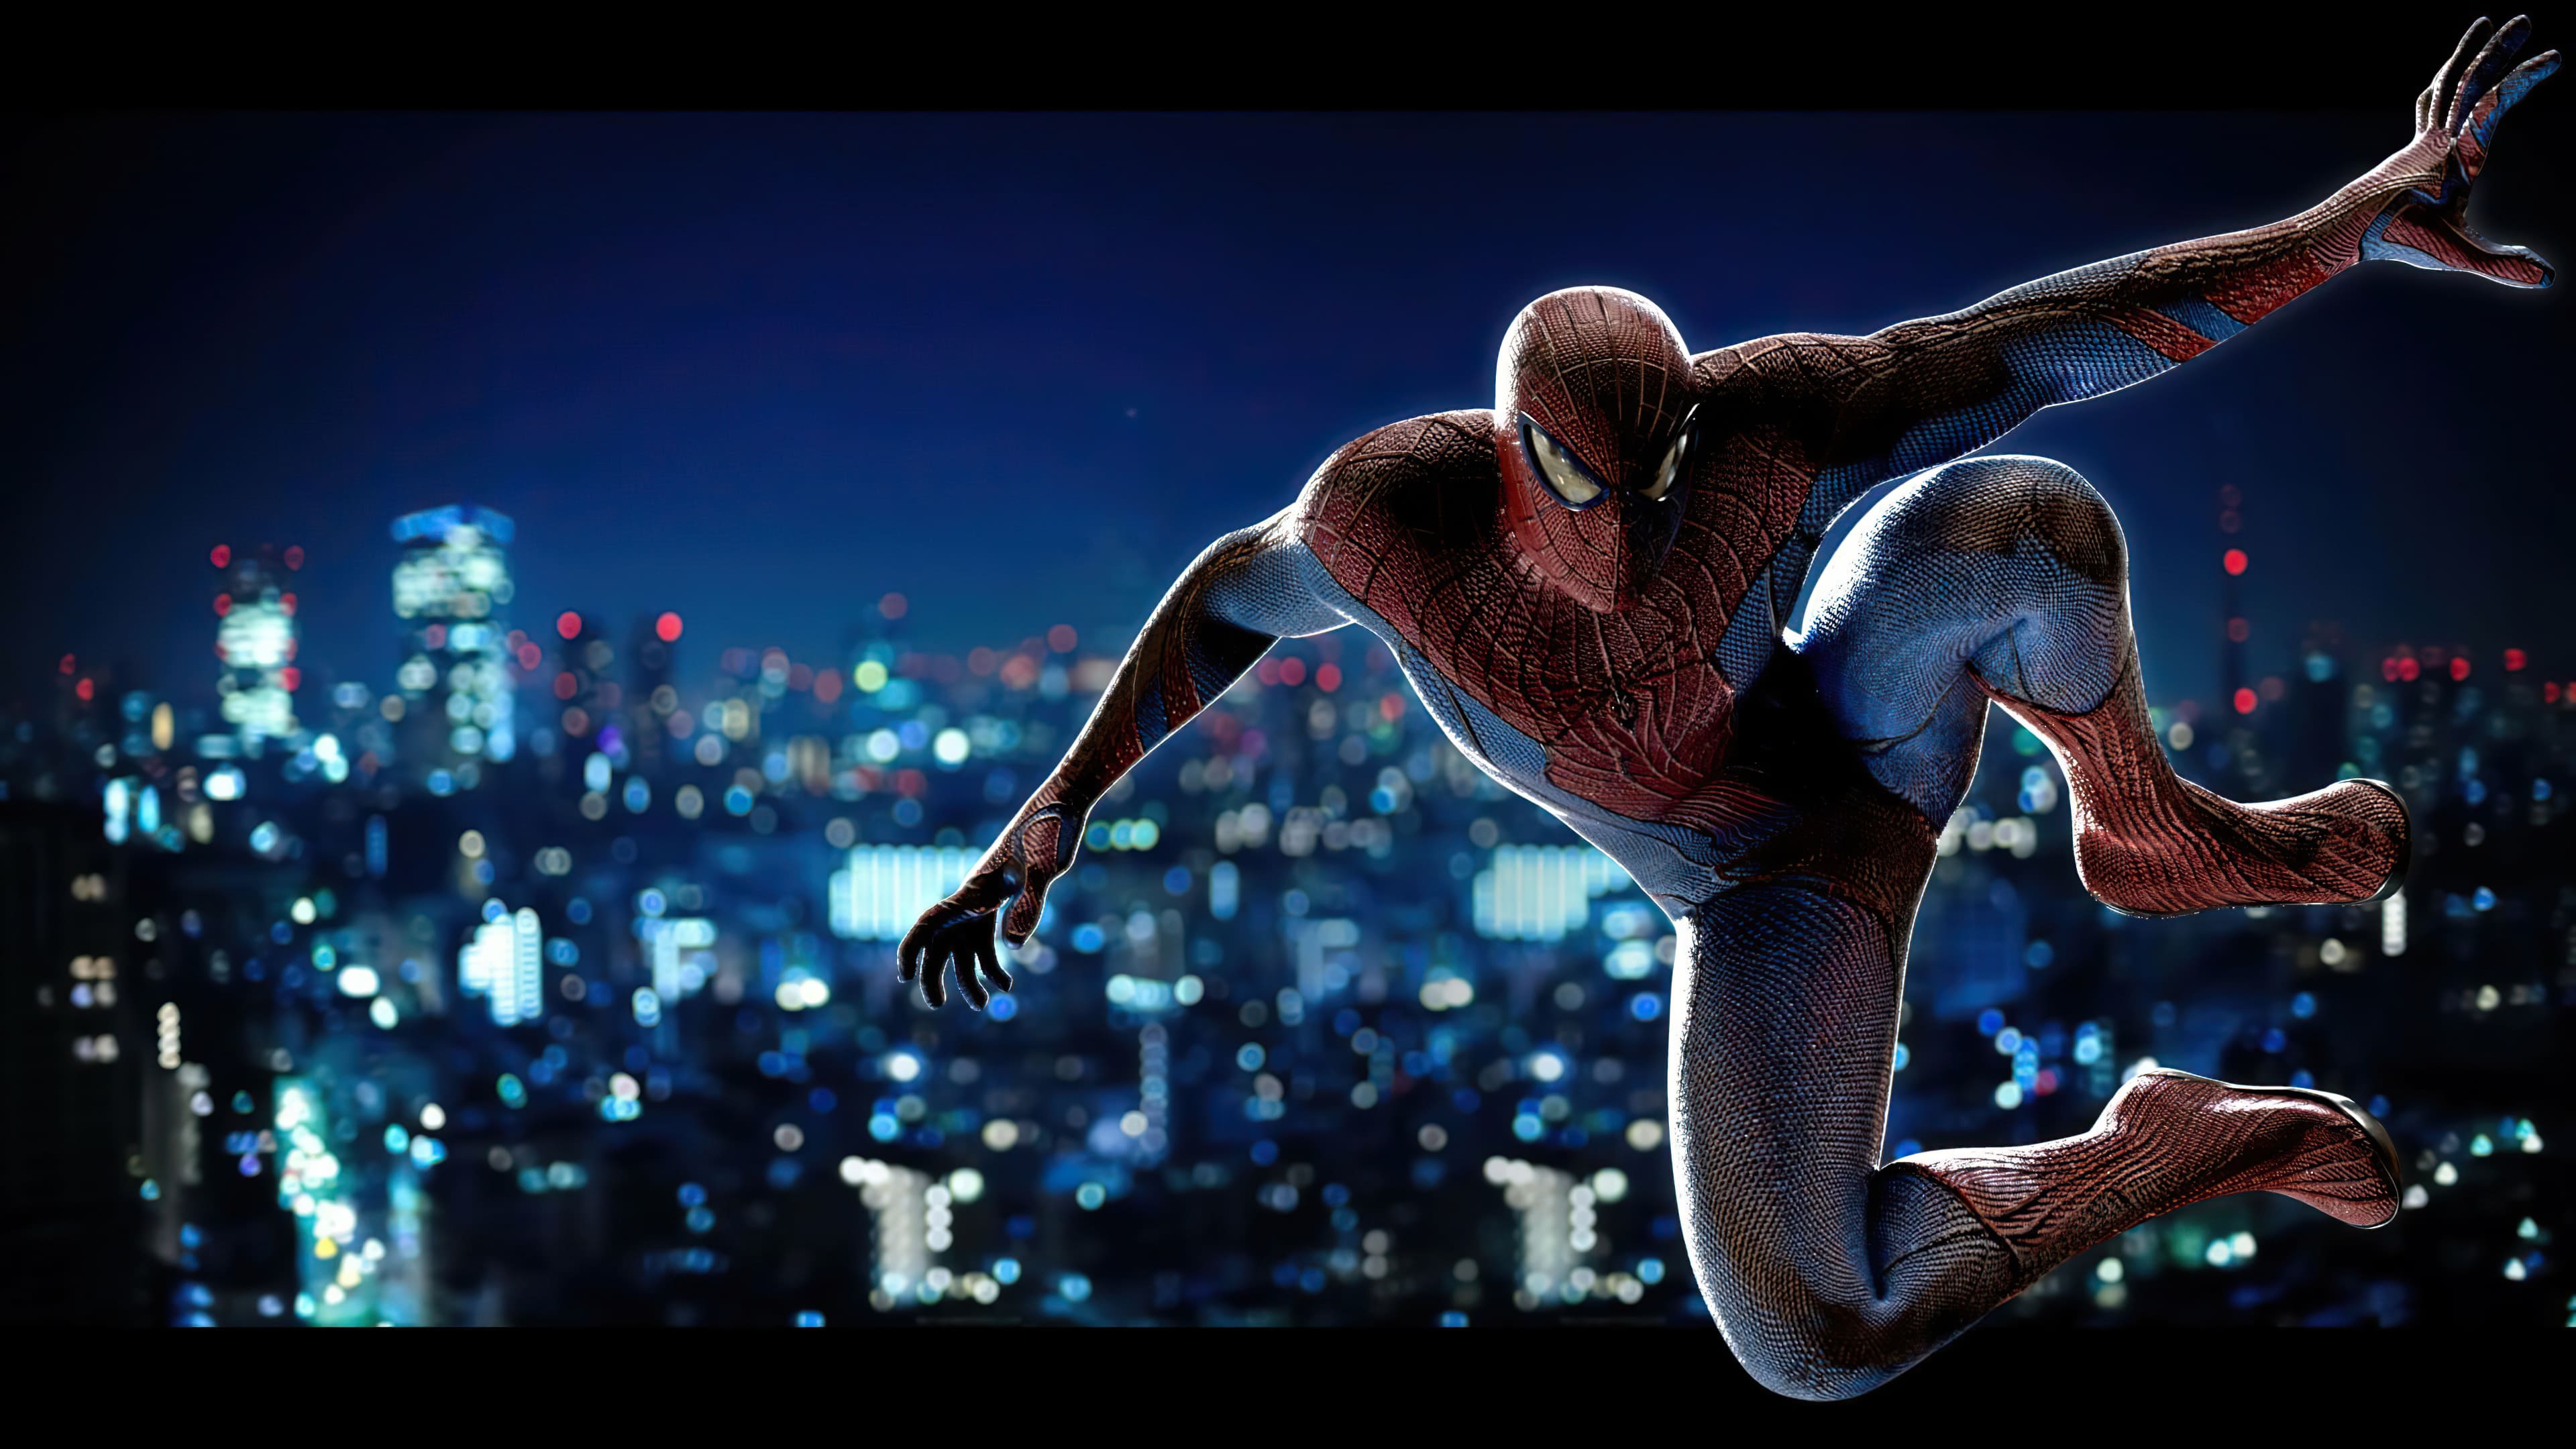 Spider man PC Wallpaper 4k To Download Full Size PC Wallpaper